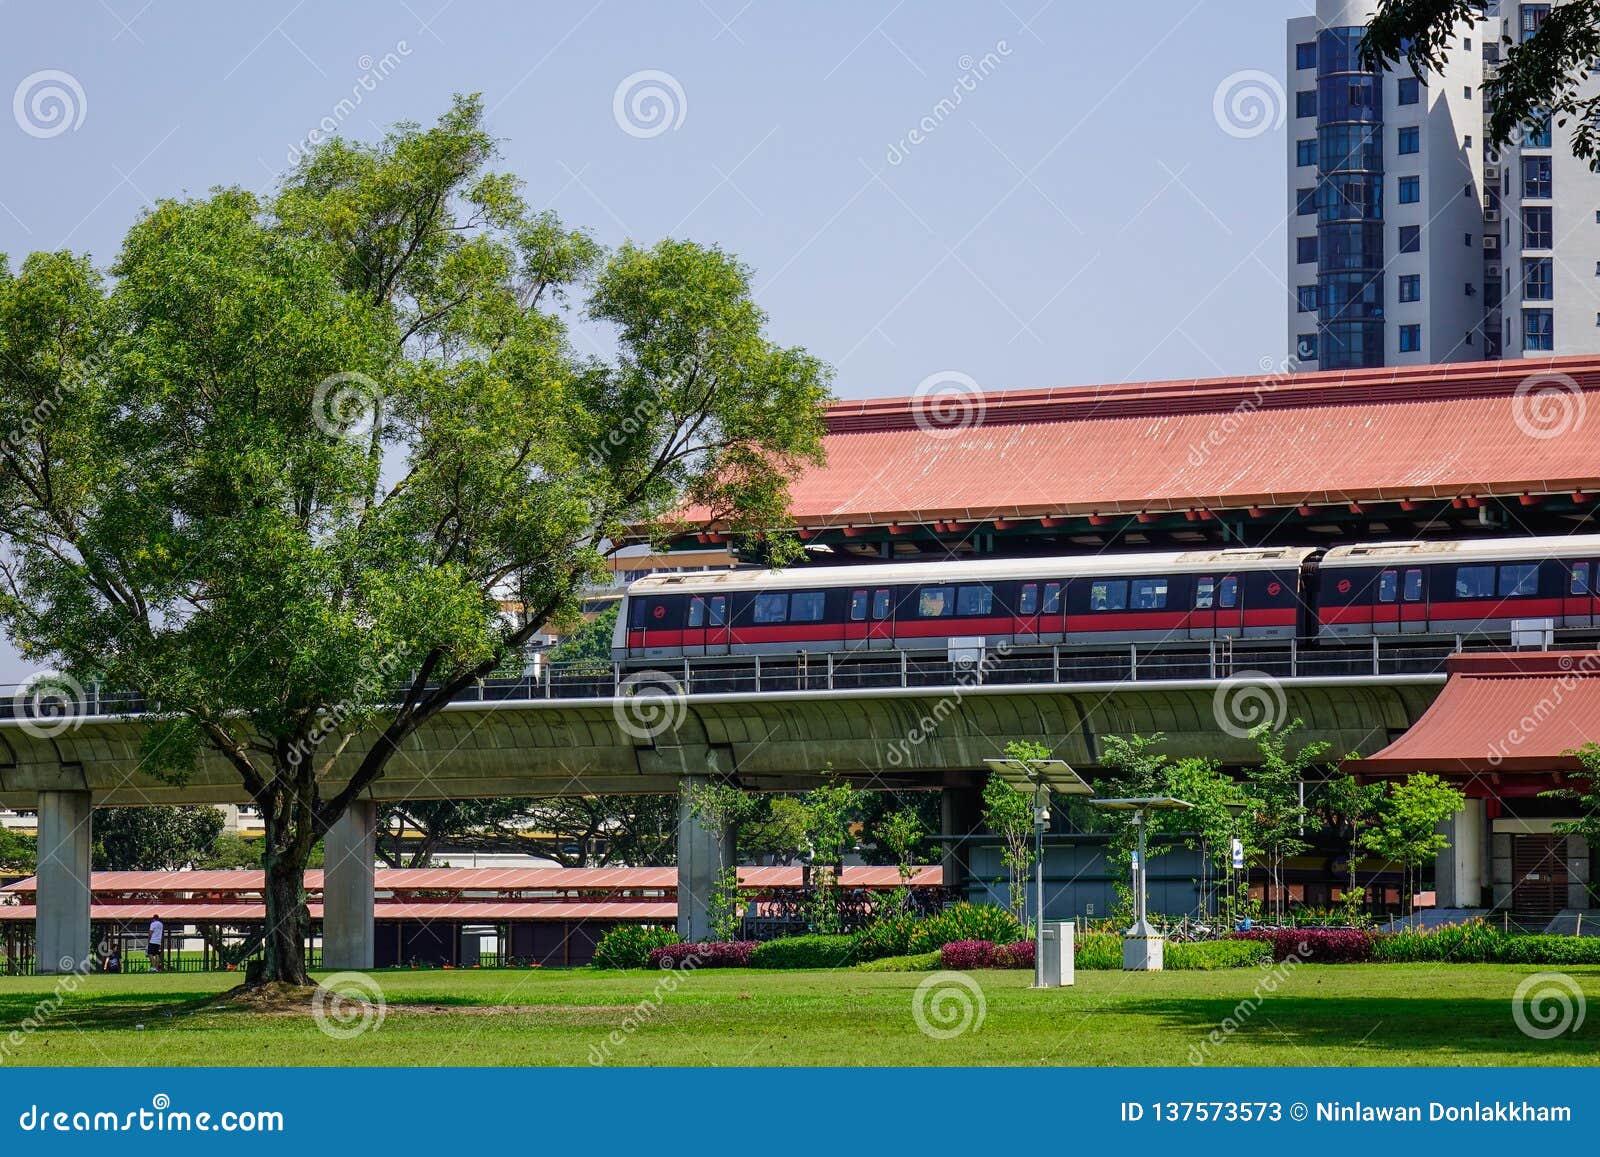 Singapore Mrt Tracks Photos Free Royalty Free Stock Photos From Dreamstime